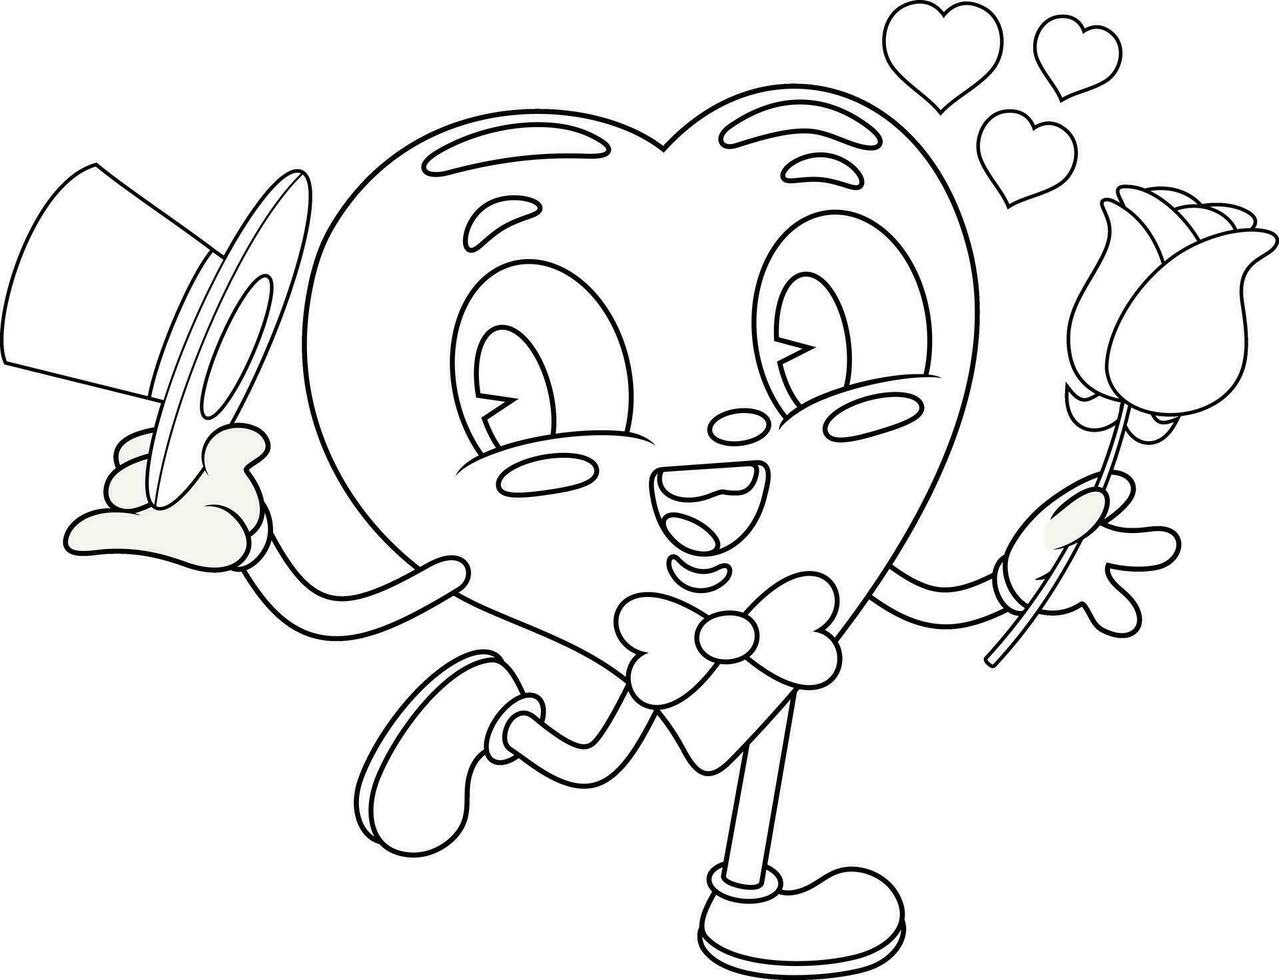 Outlined Cute Heart Retro Cartoon Character Holding A Rose. Vector Hand Drawn Illustration